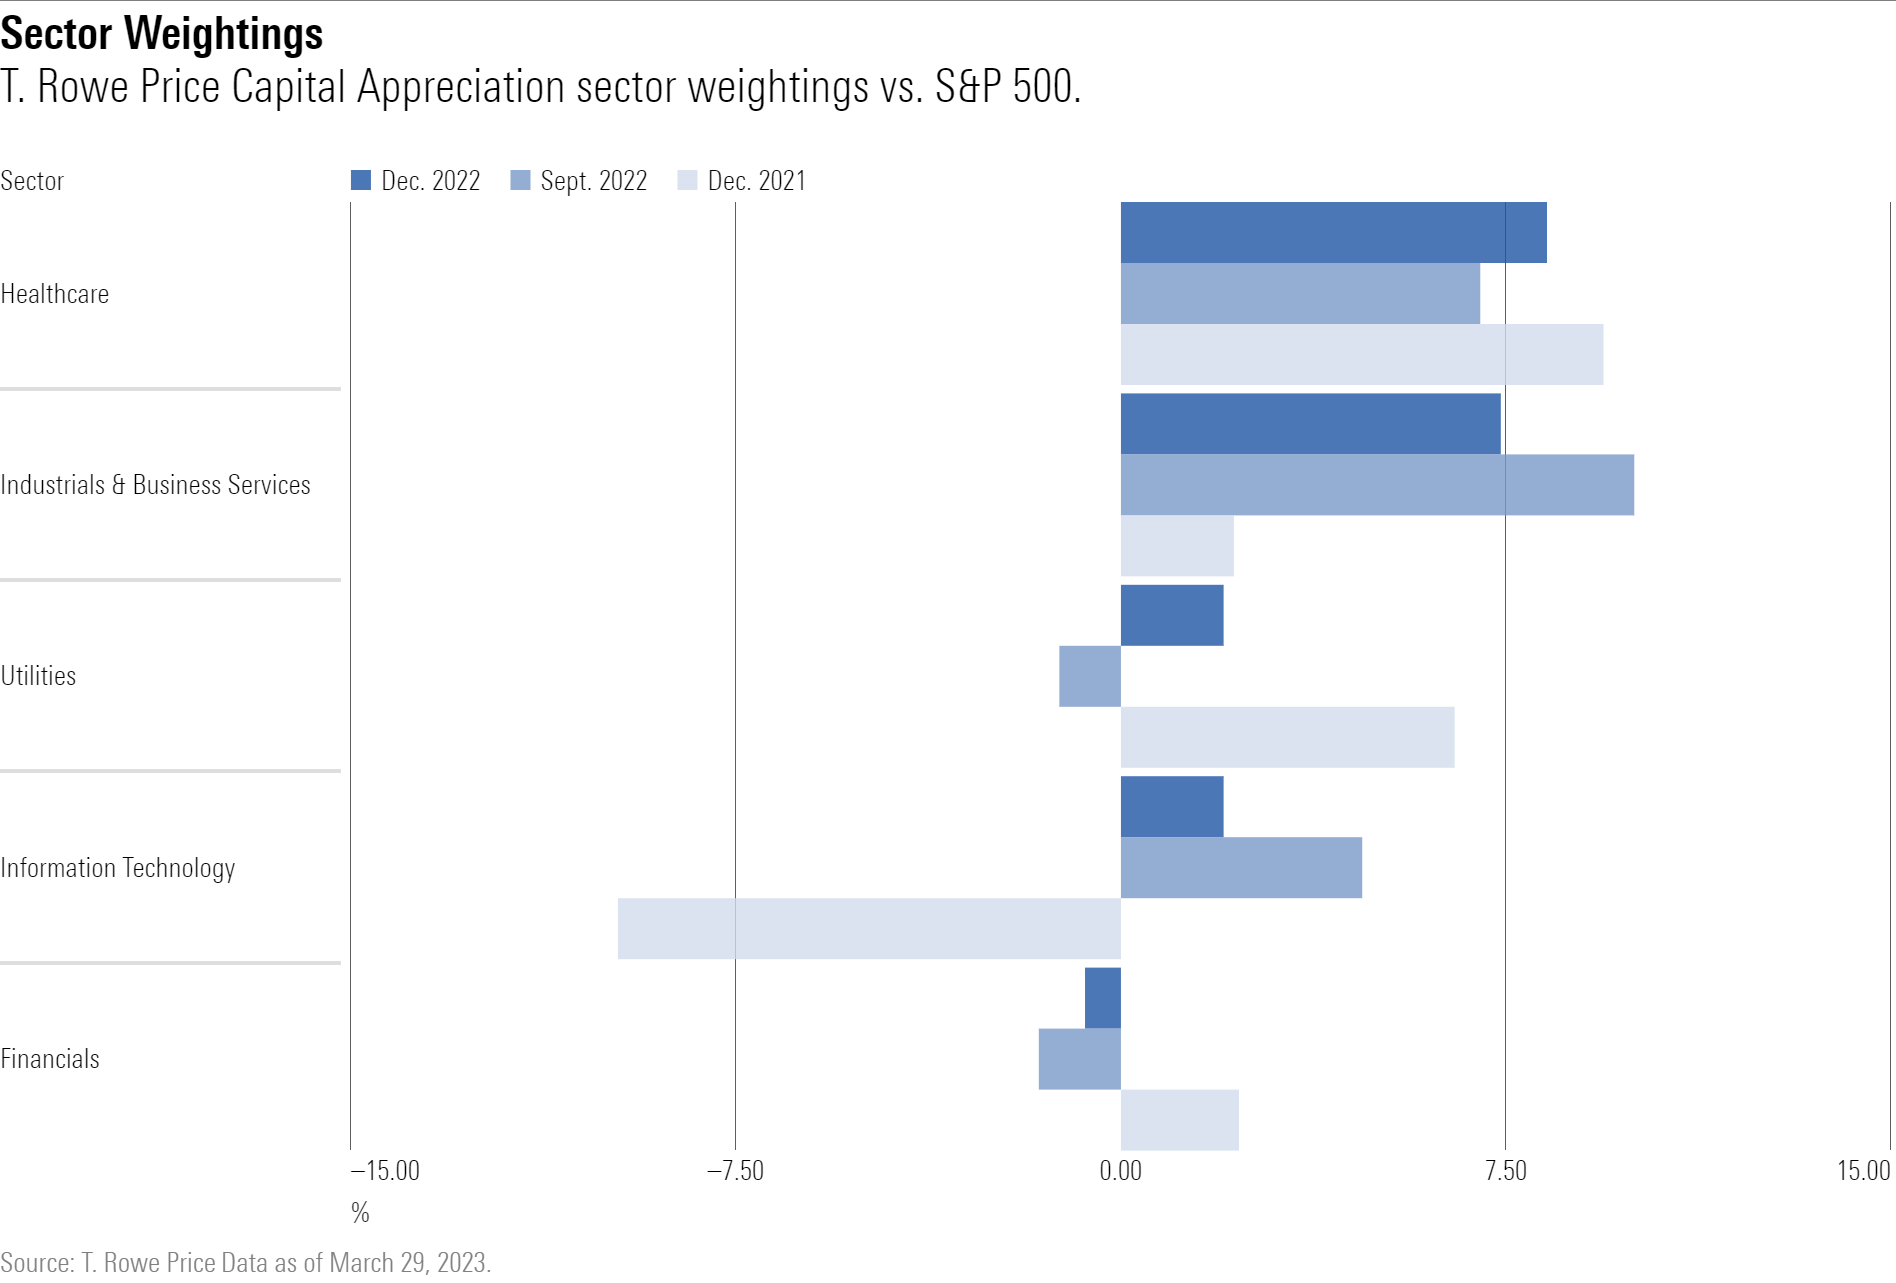 Bar chart showing changes in sector weightings for T. Rowe Price Capital Appreciation Fund